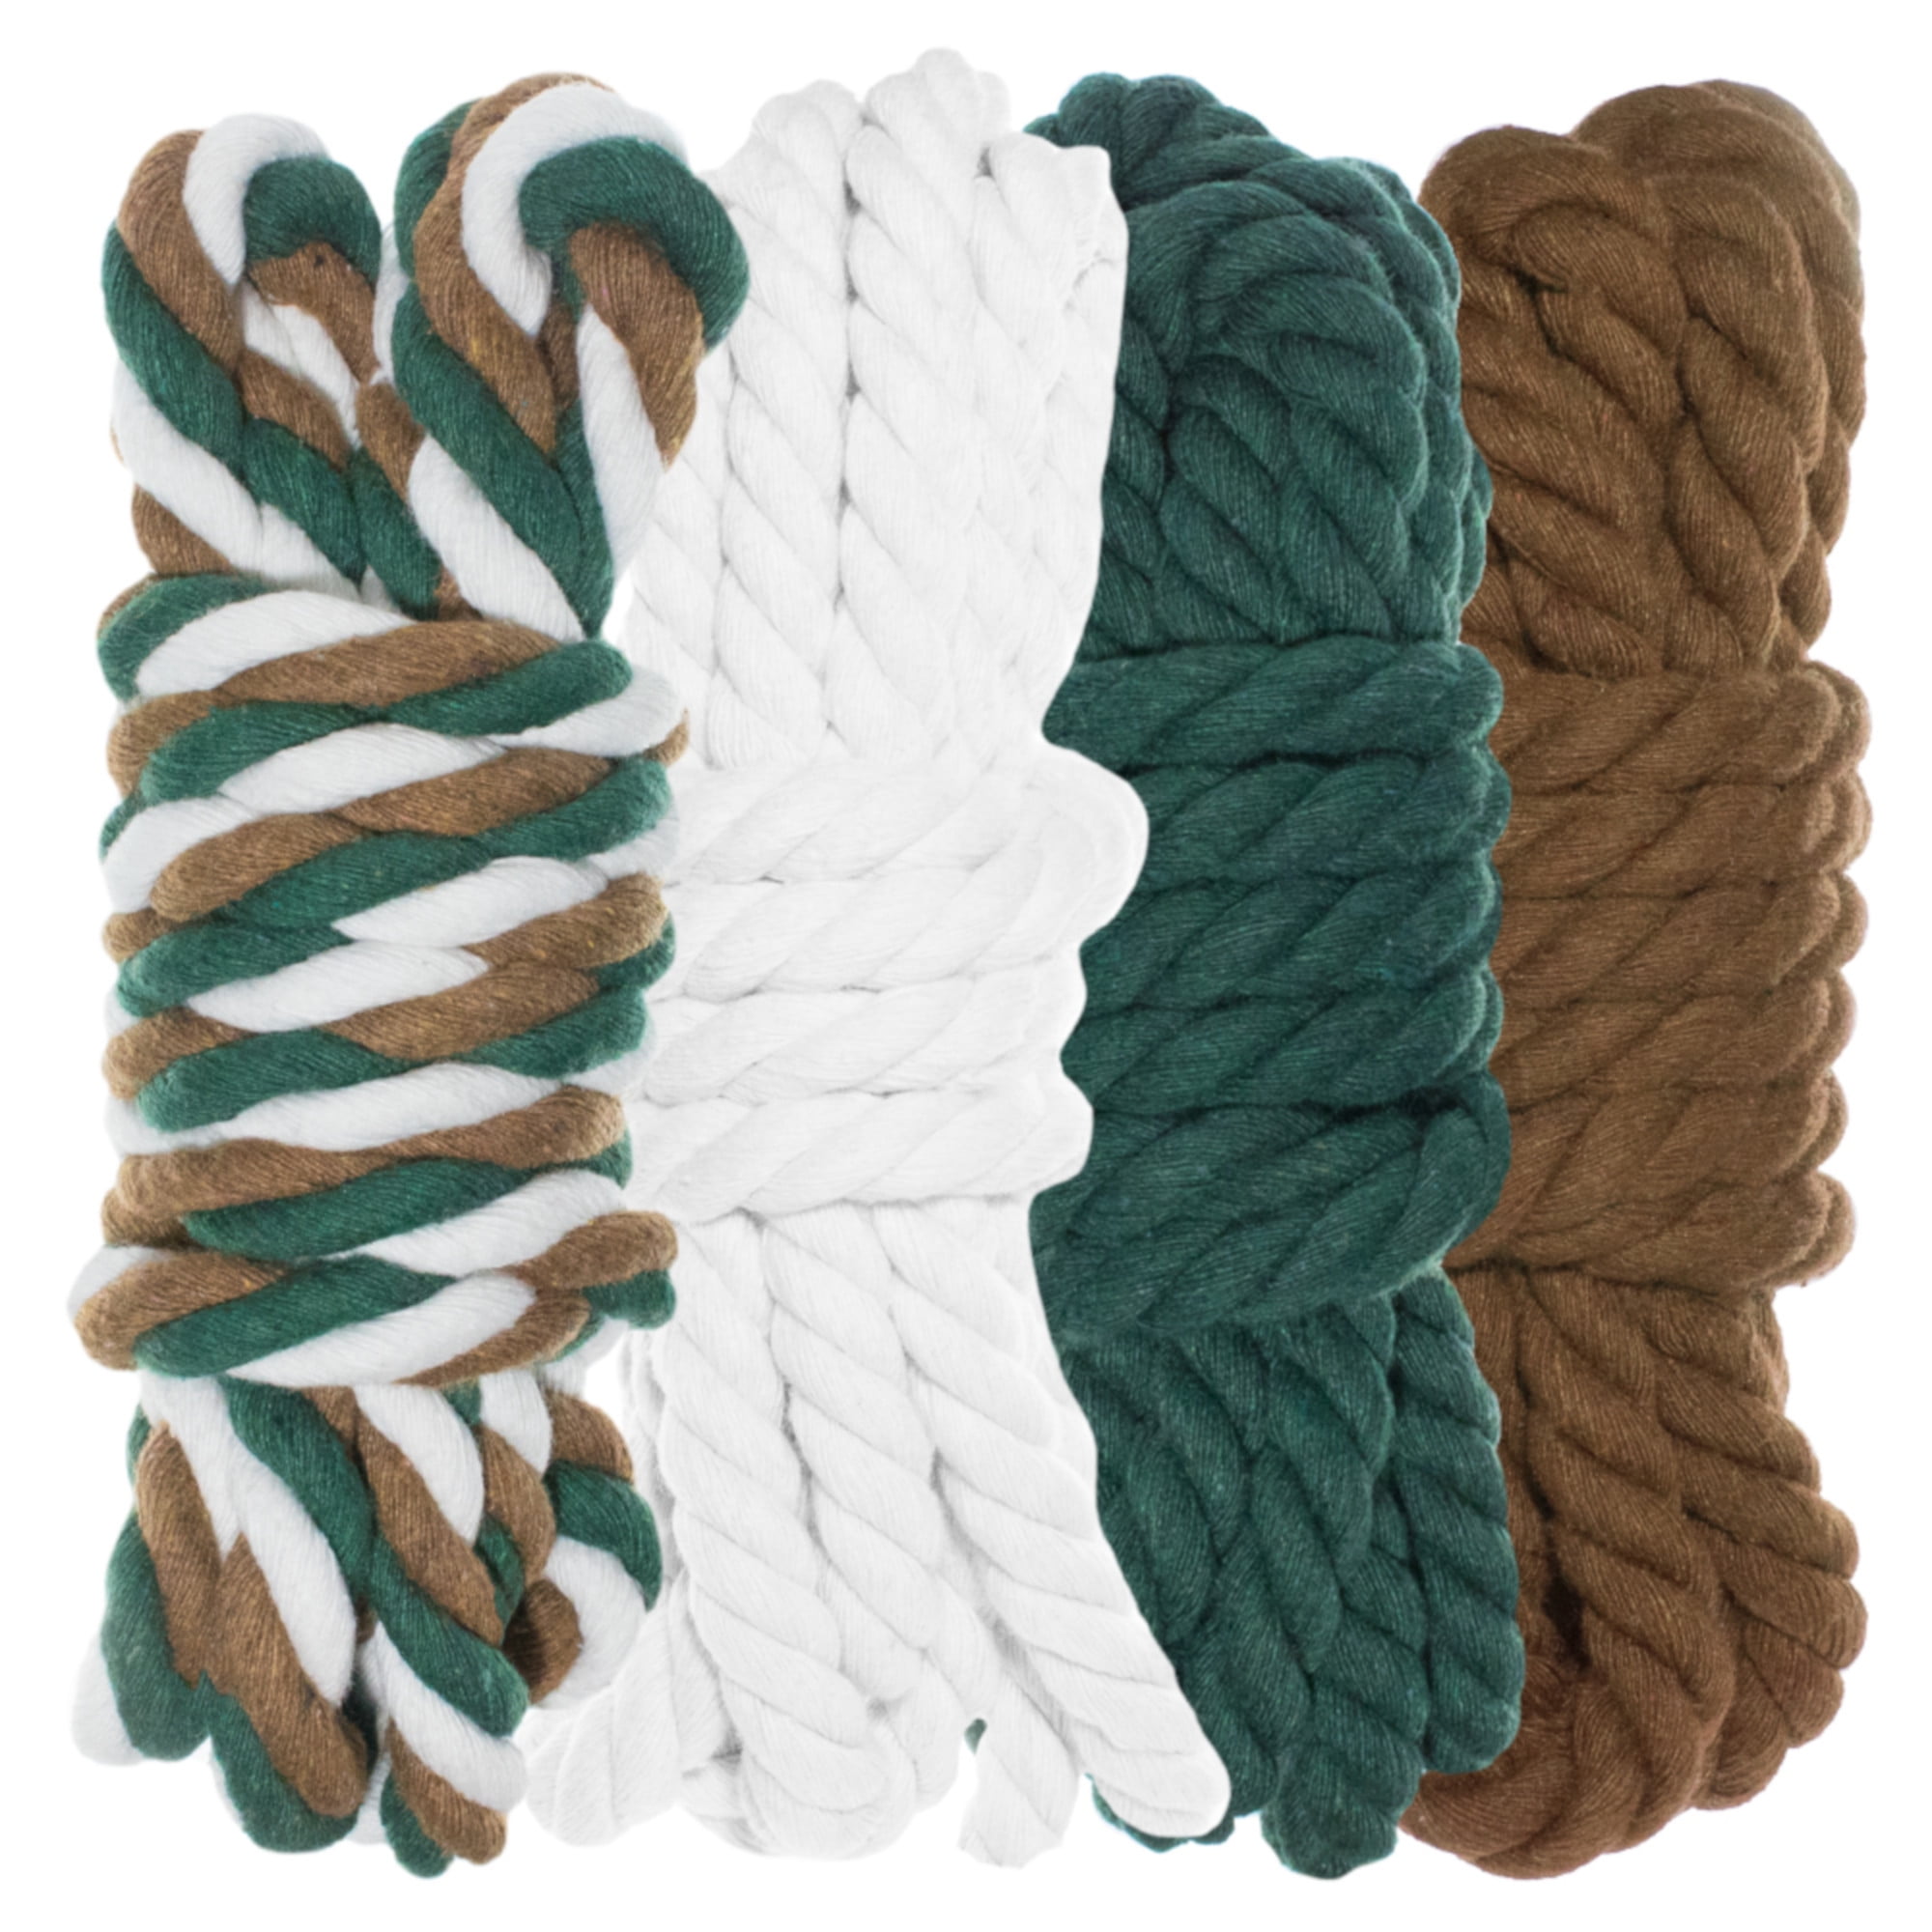 1OO% Cotton Rope (1 inch x 48 feet) Natural Thick Twisted Rope for Crafts,  Sports Tug of War, Hammock, Home Decorating Wedding Rope